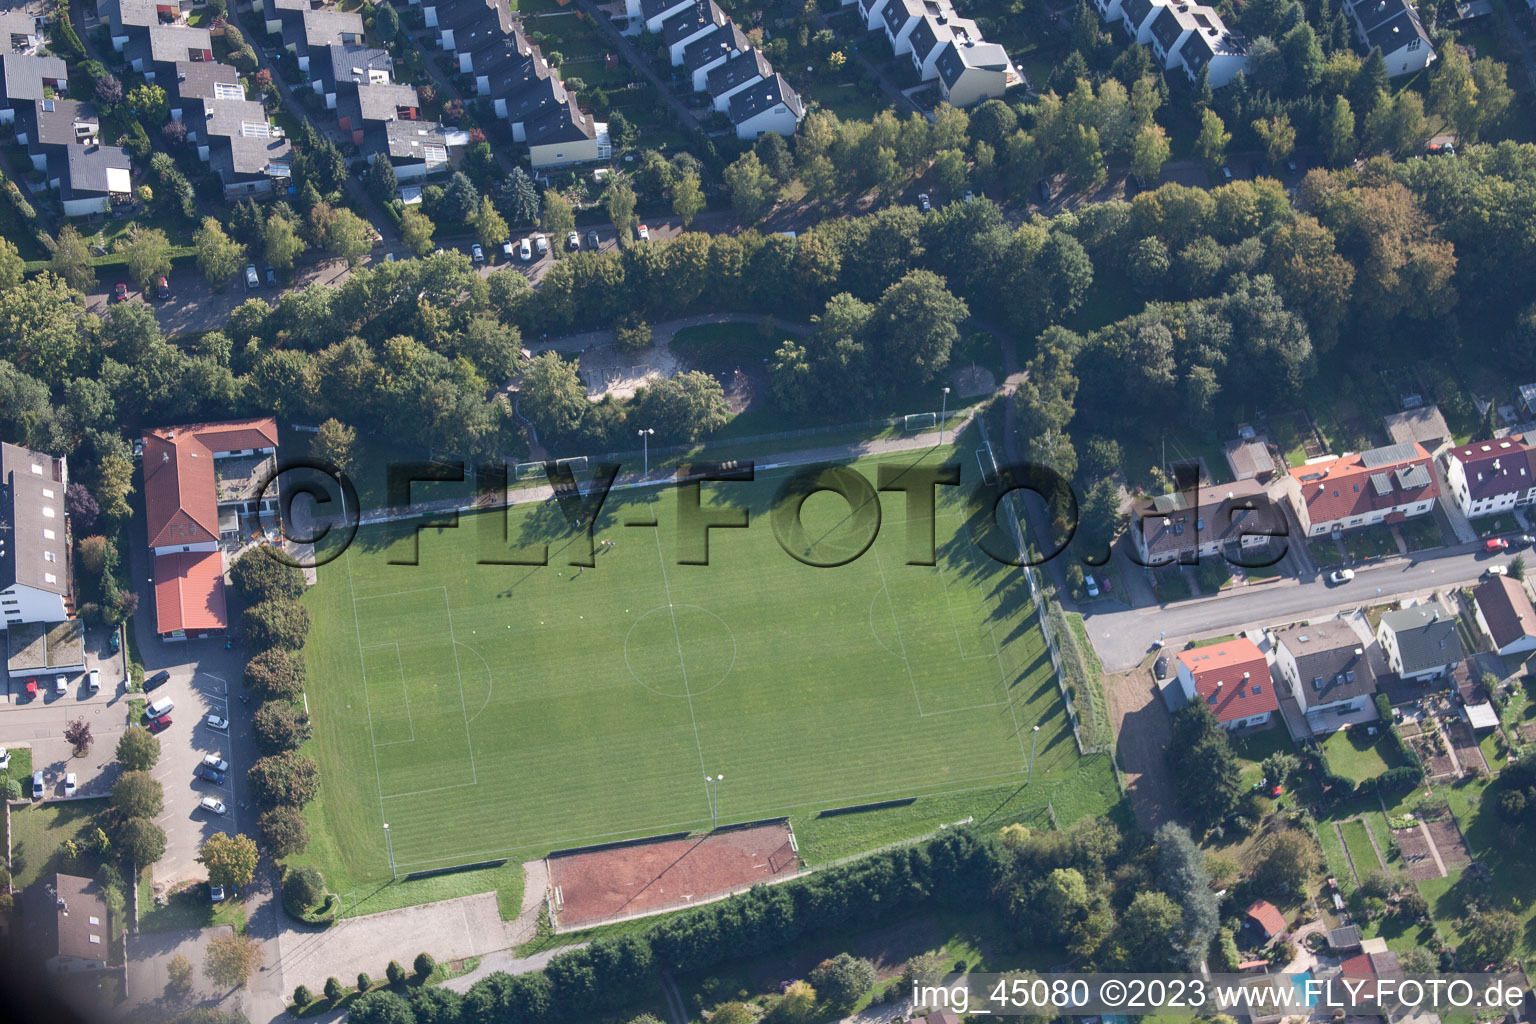 Aerial view of FC Busenbach 1920 eV in the district Busenbach in Waldbronn in the state Baden-Wuerttemberg, Germany